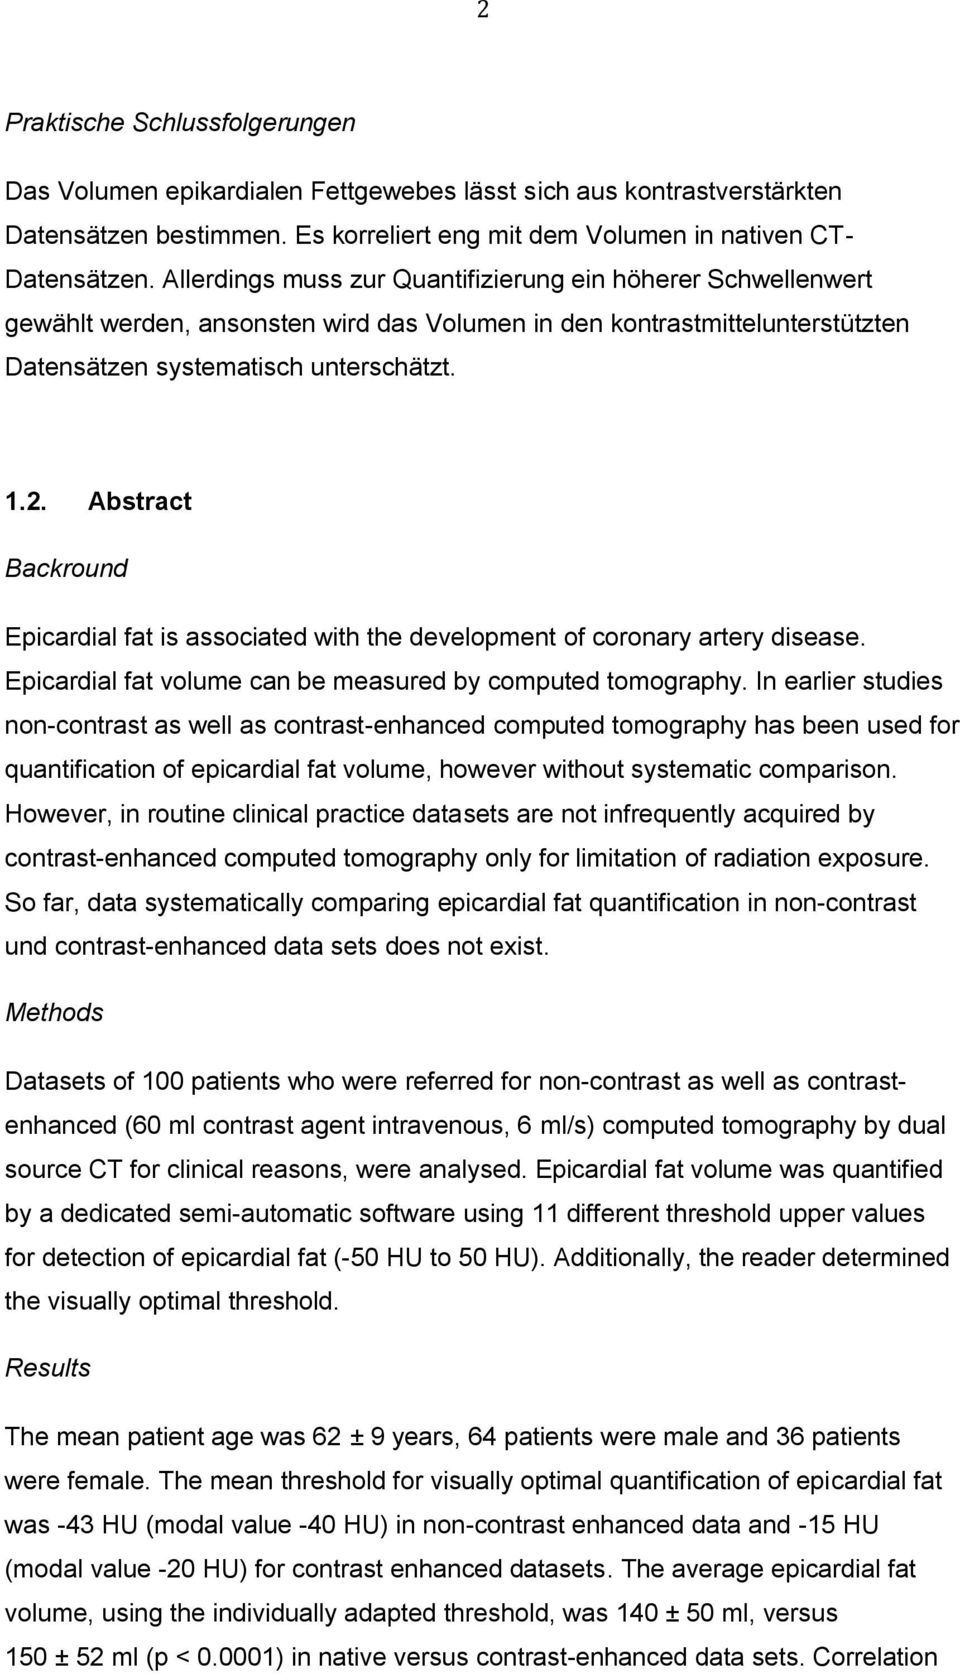 Abstract Backround Epicardial fat is associated with the development of coronary artery disease. Epicardial fat volume can be measured by computed tomography.